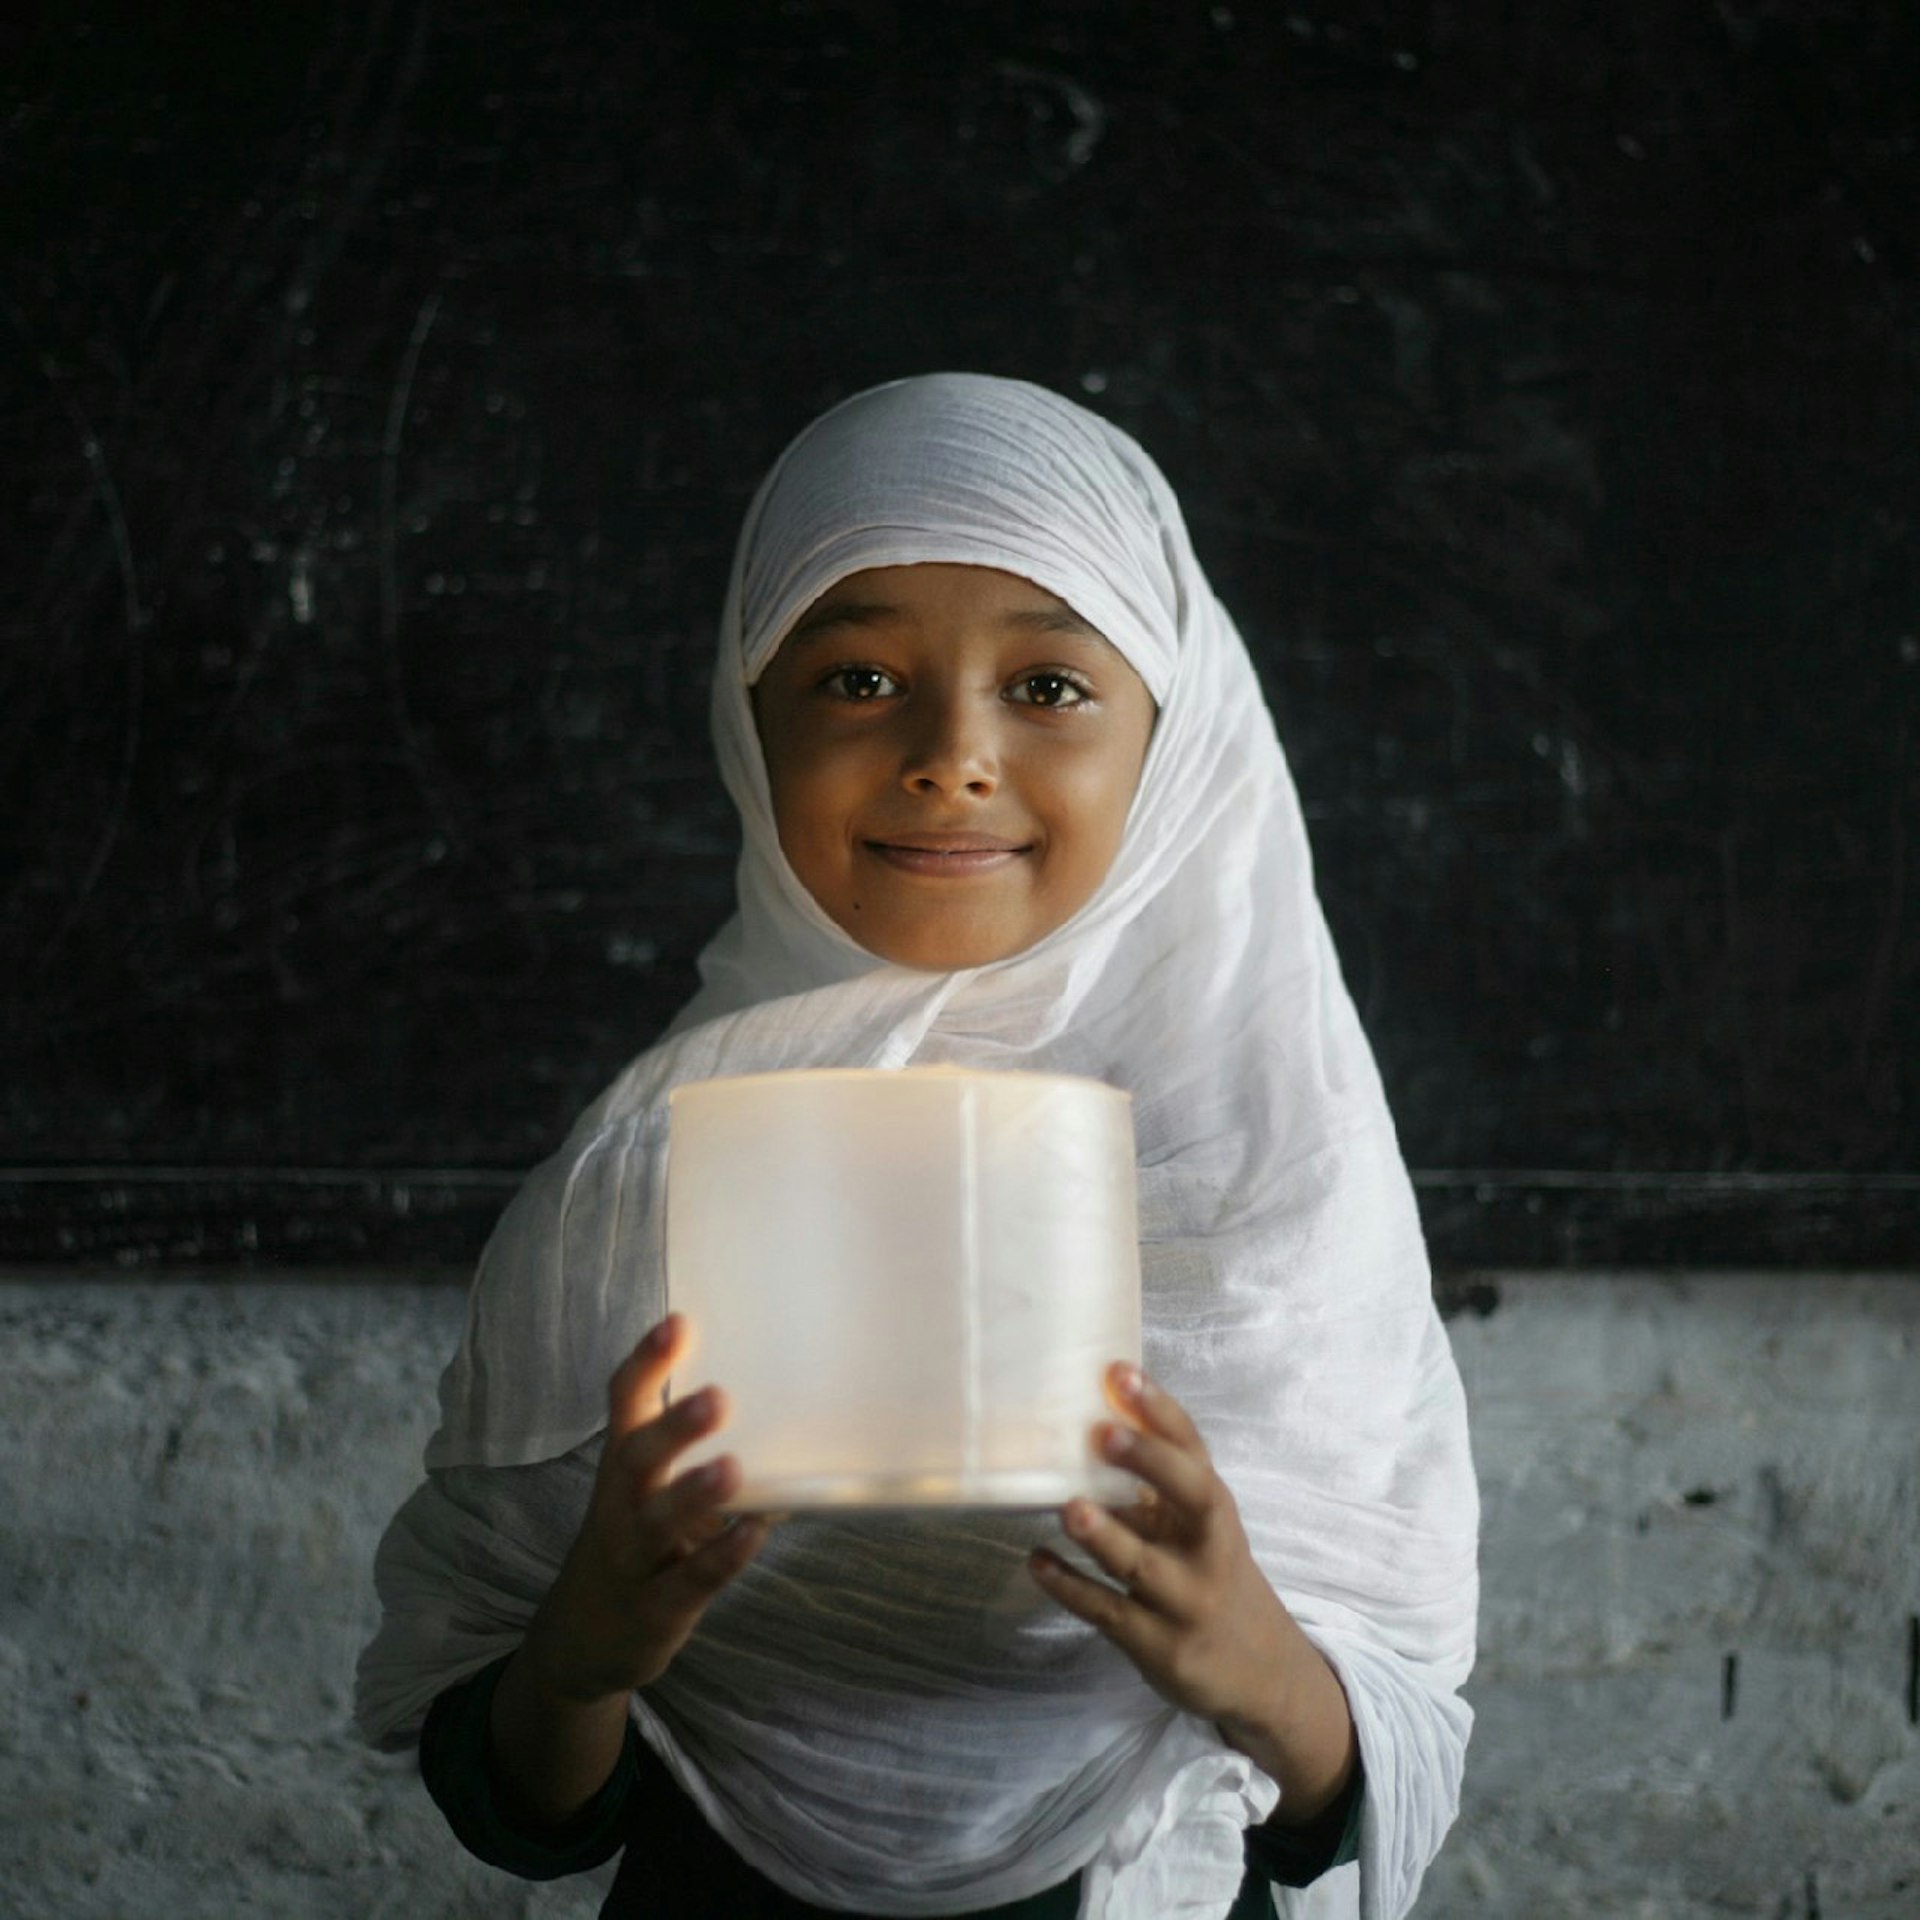 The Give Luci program puts lights in the hands of people who need it most.